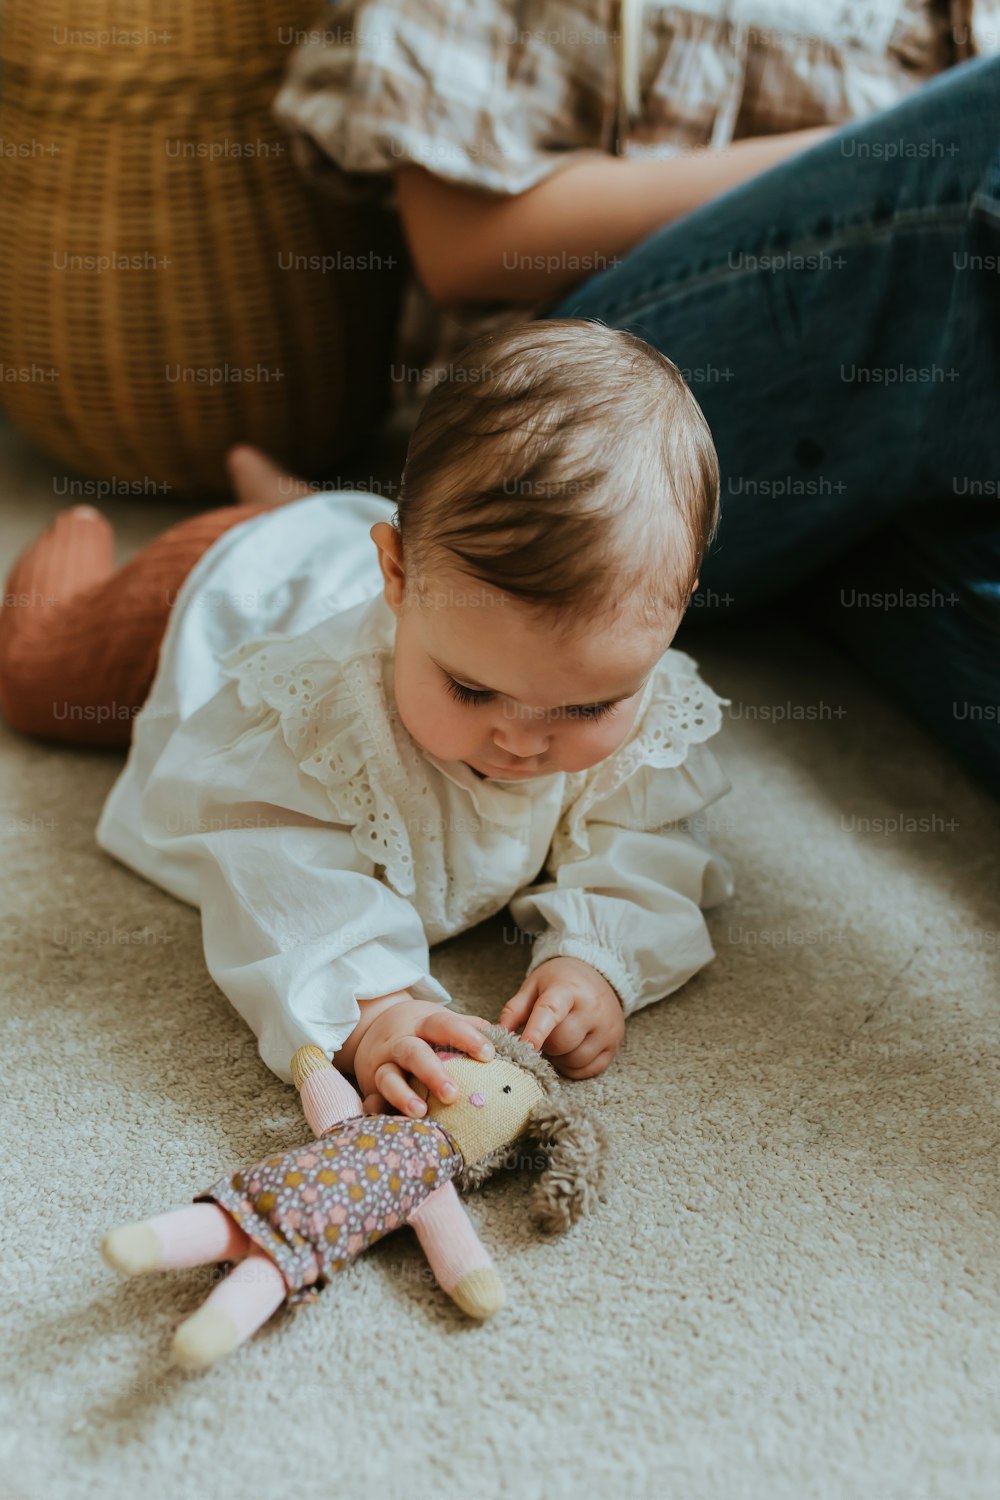 a baby playing with a stuffed animal on the floor